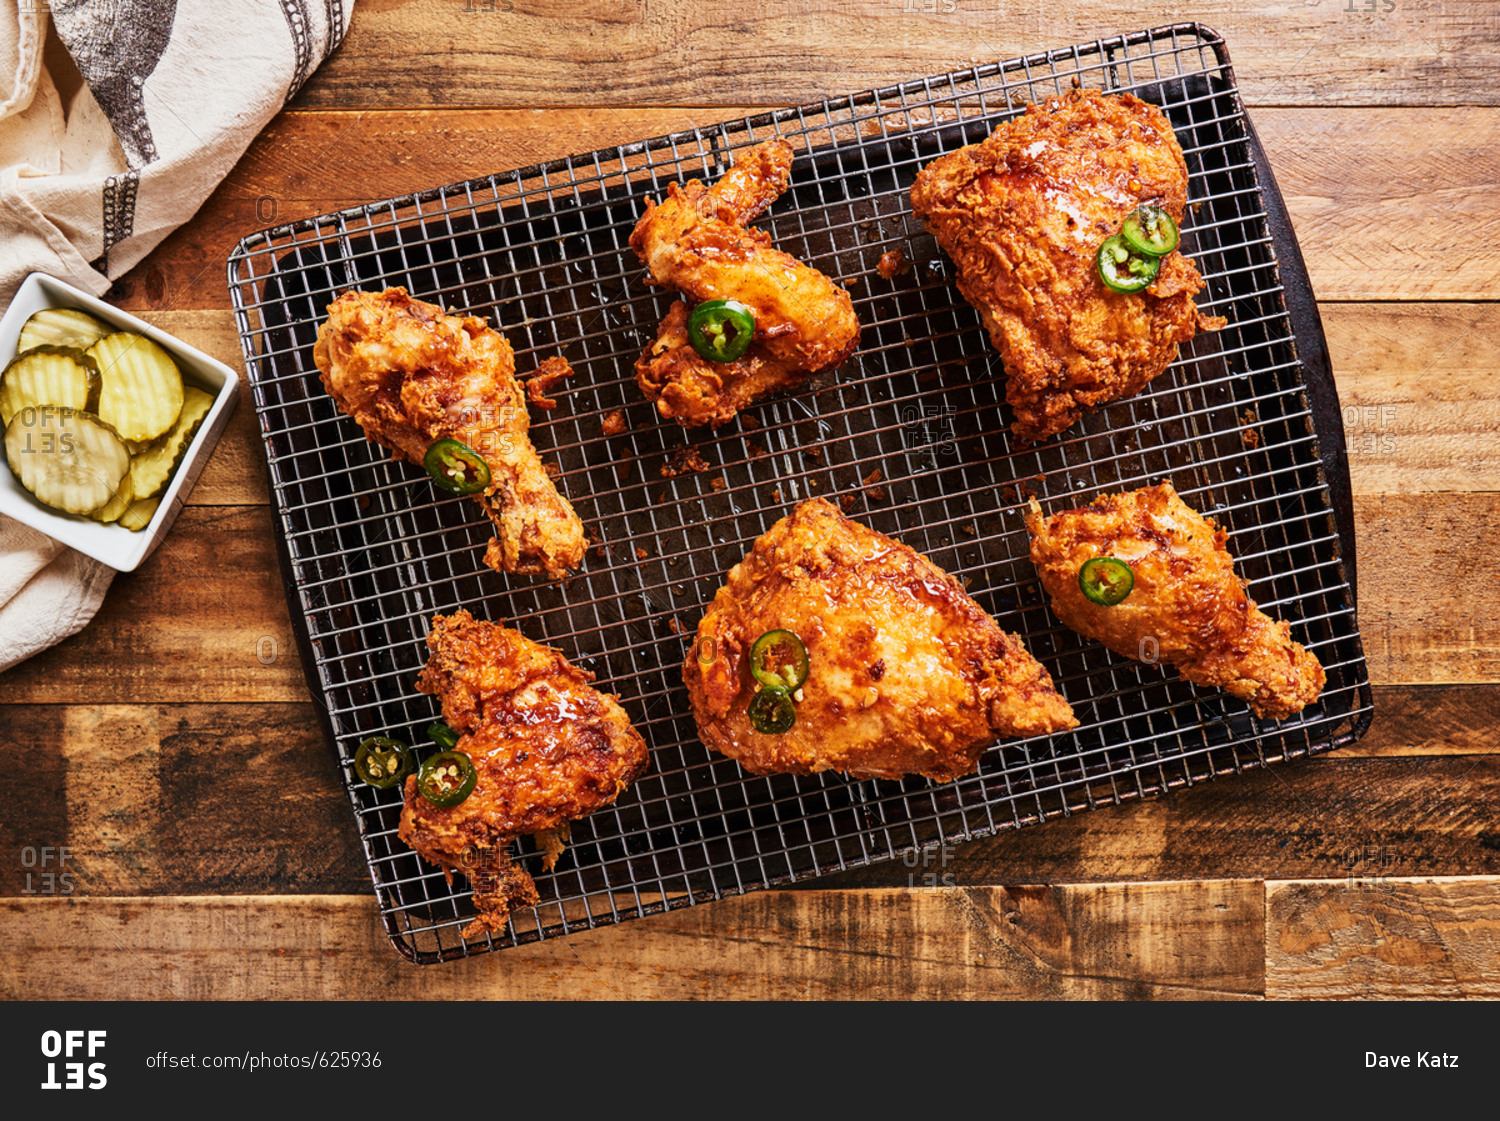 Fried chicken with jalapenos